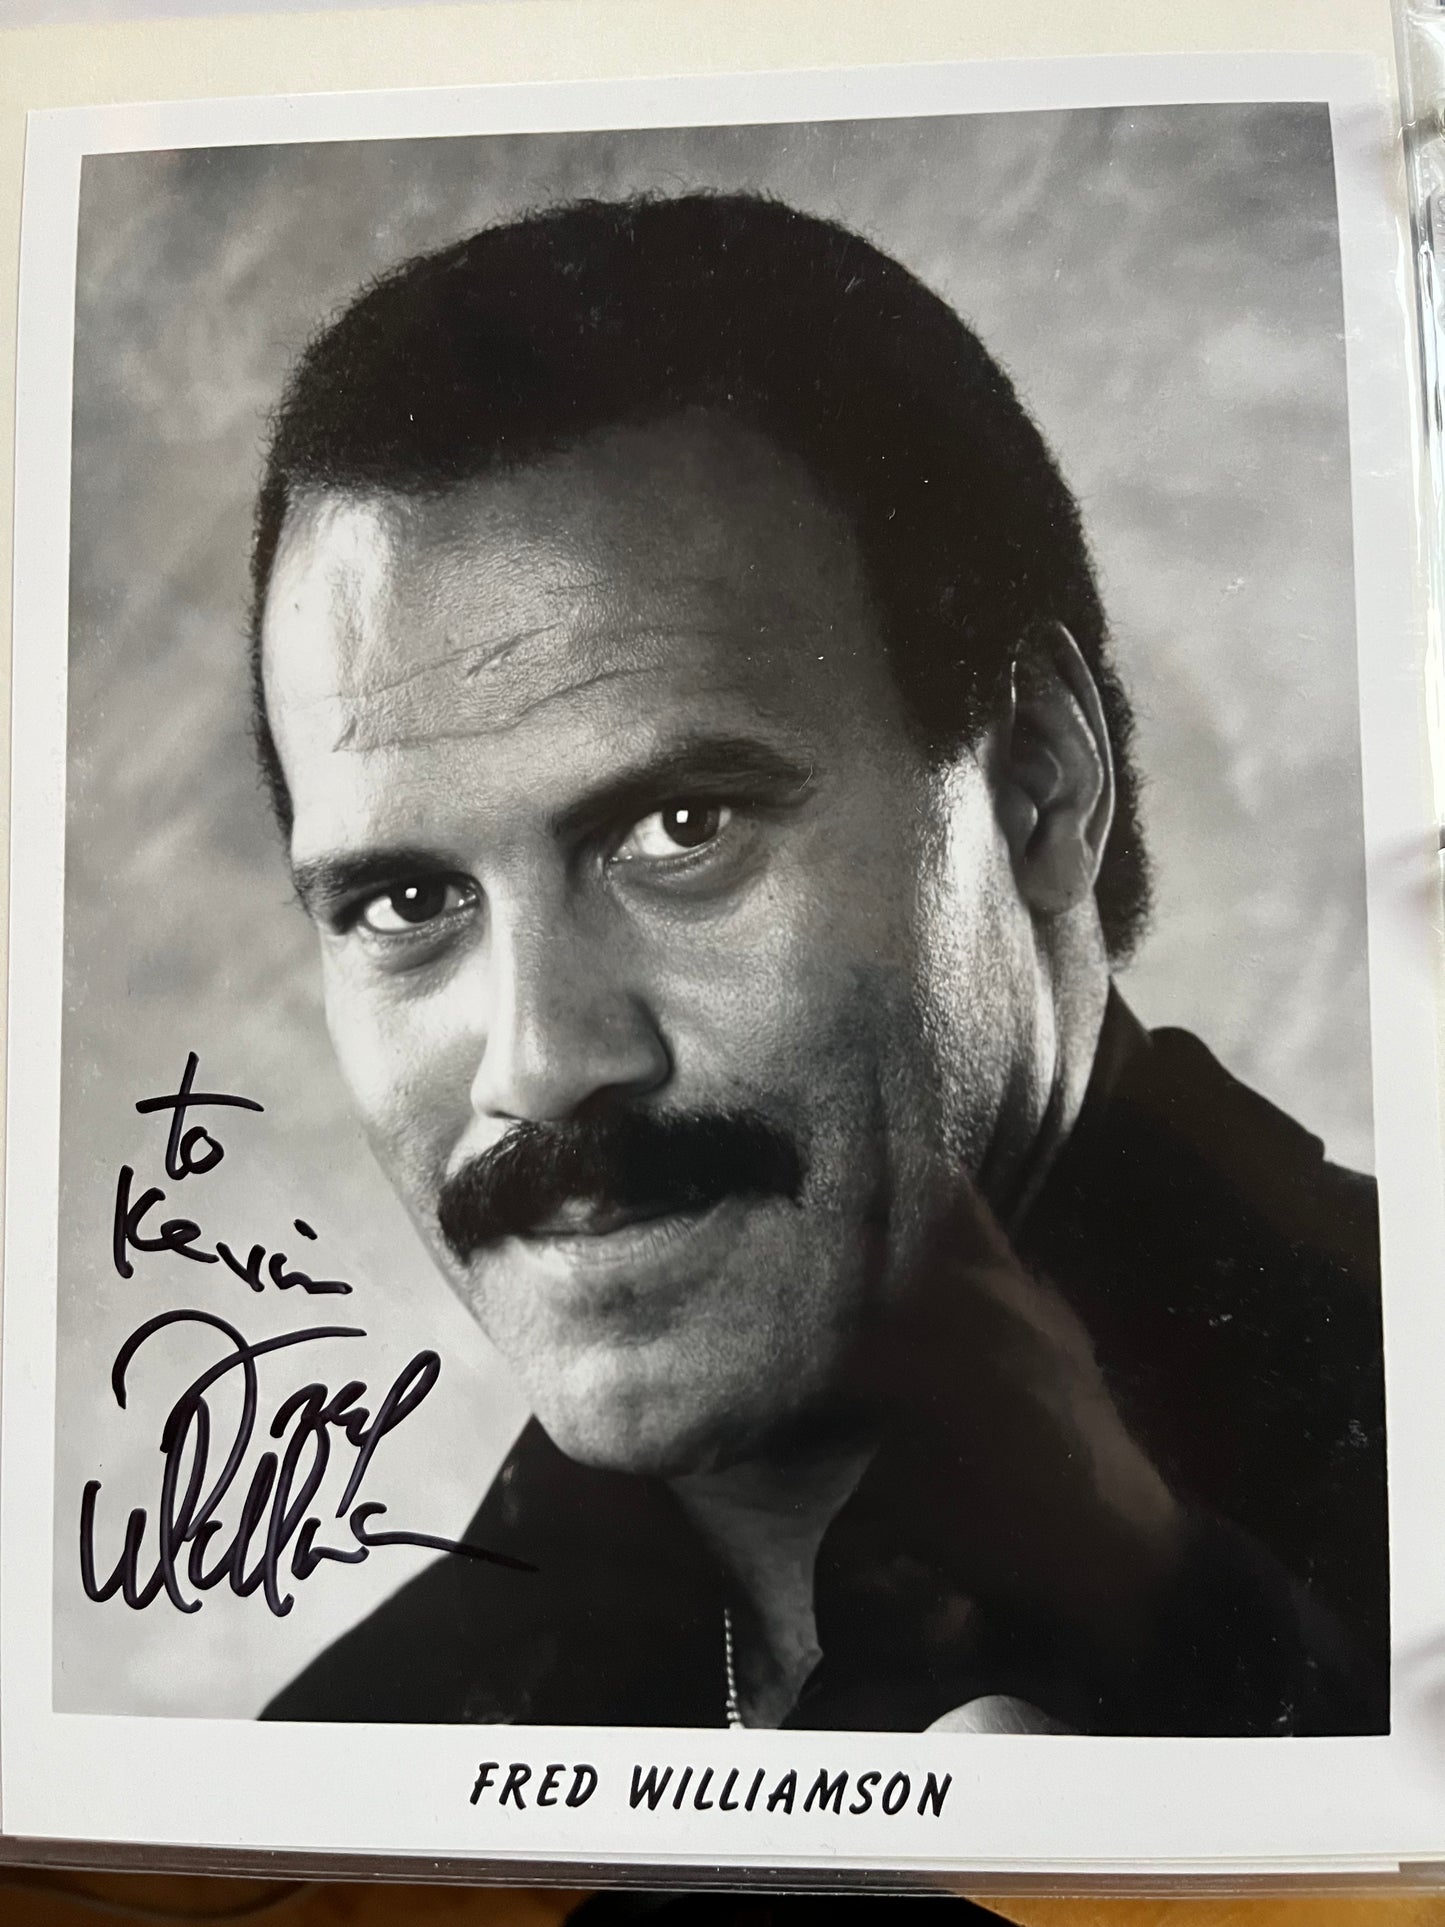 FRED WILLIAMSON, actor and football player, autograph